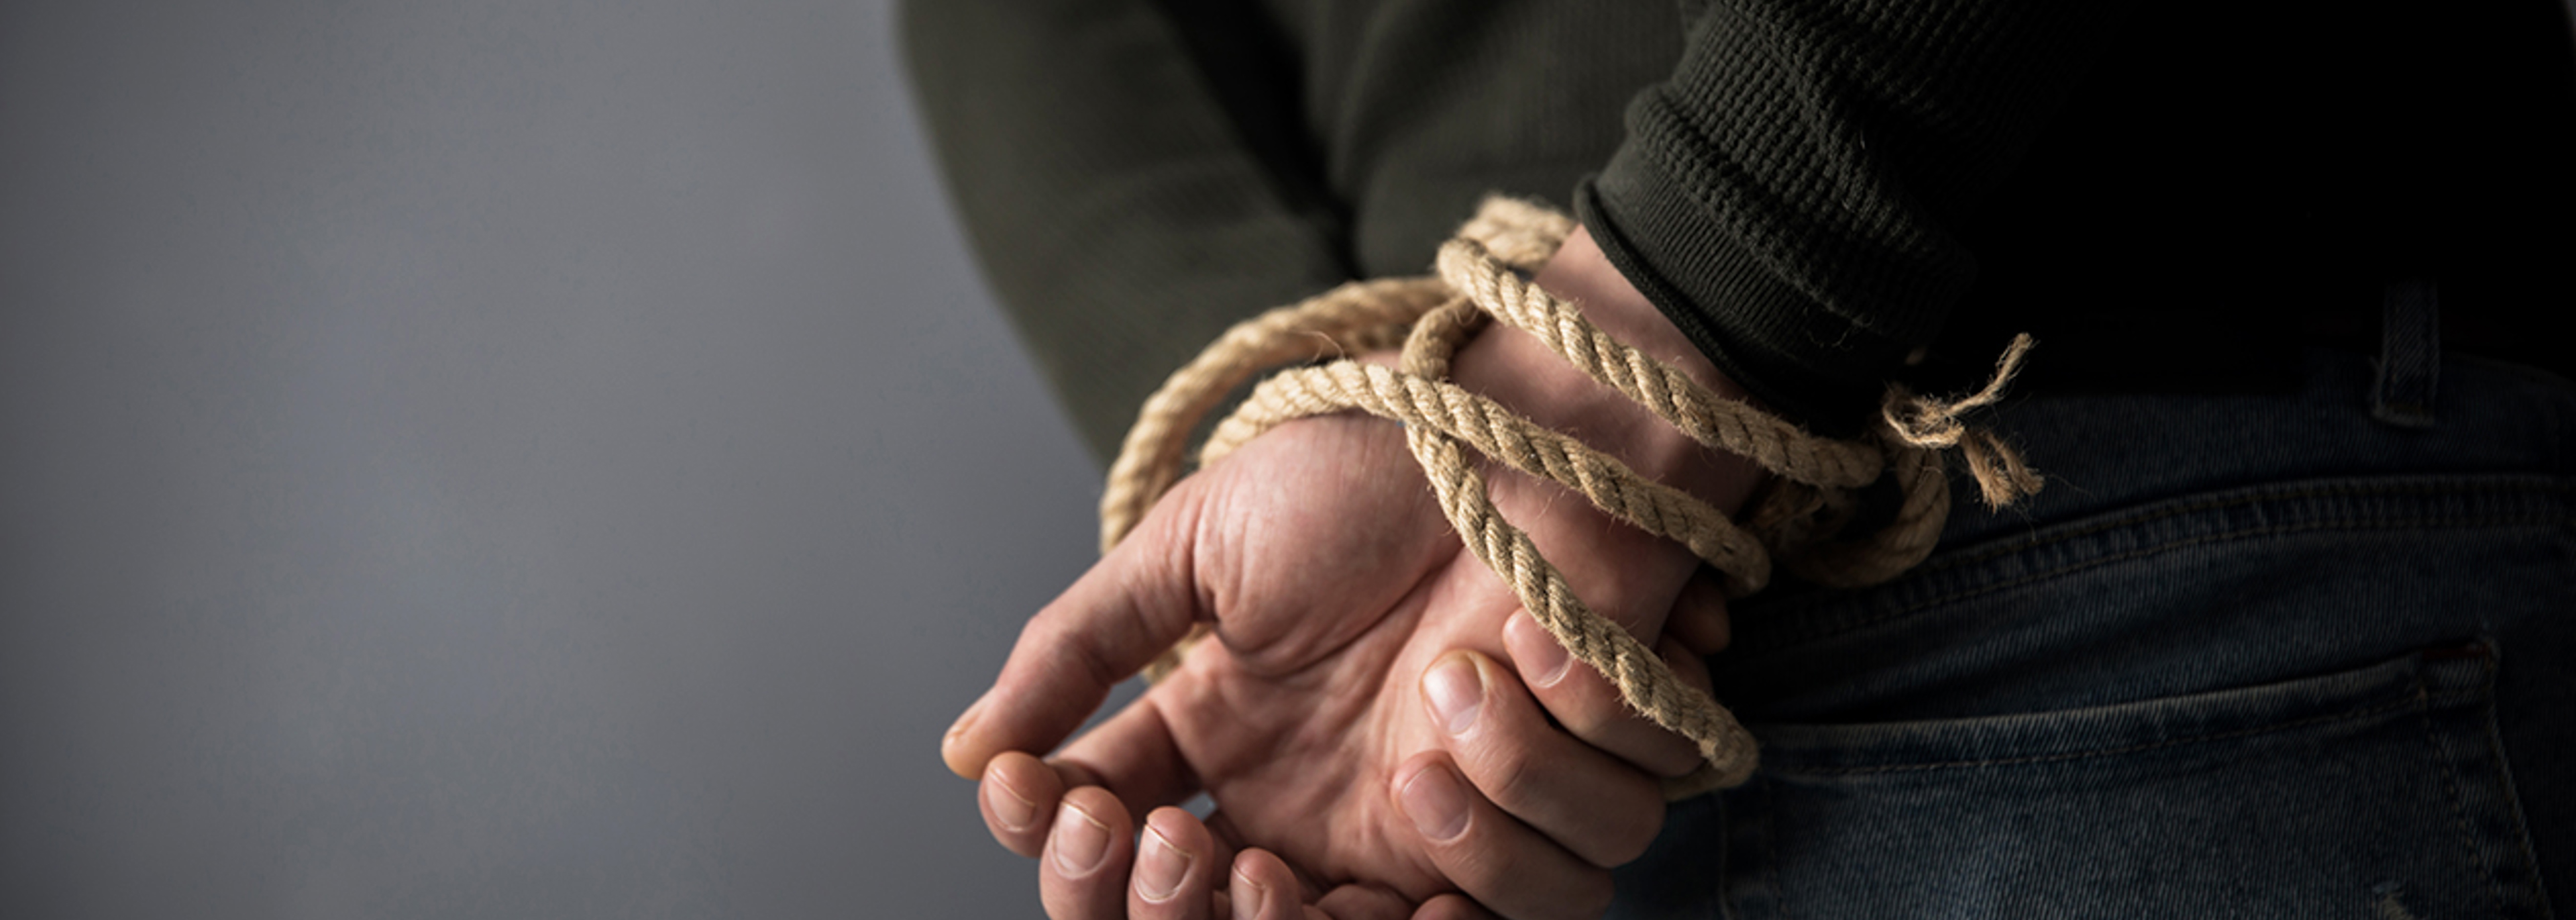 Modern slavery ‘rising threat to our communities’